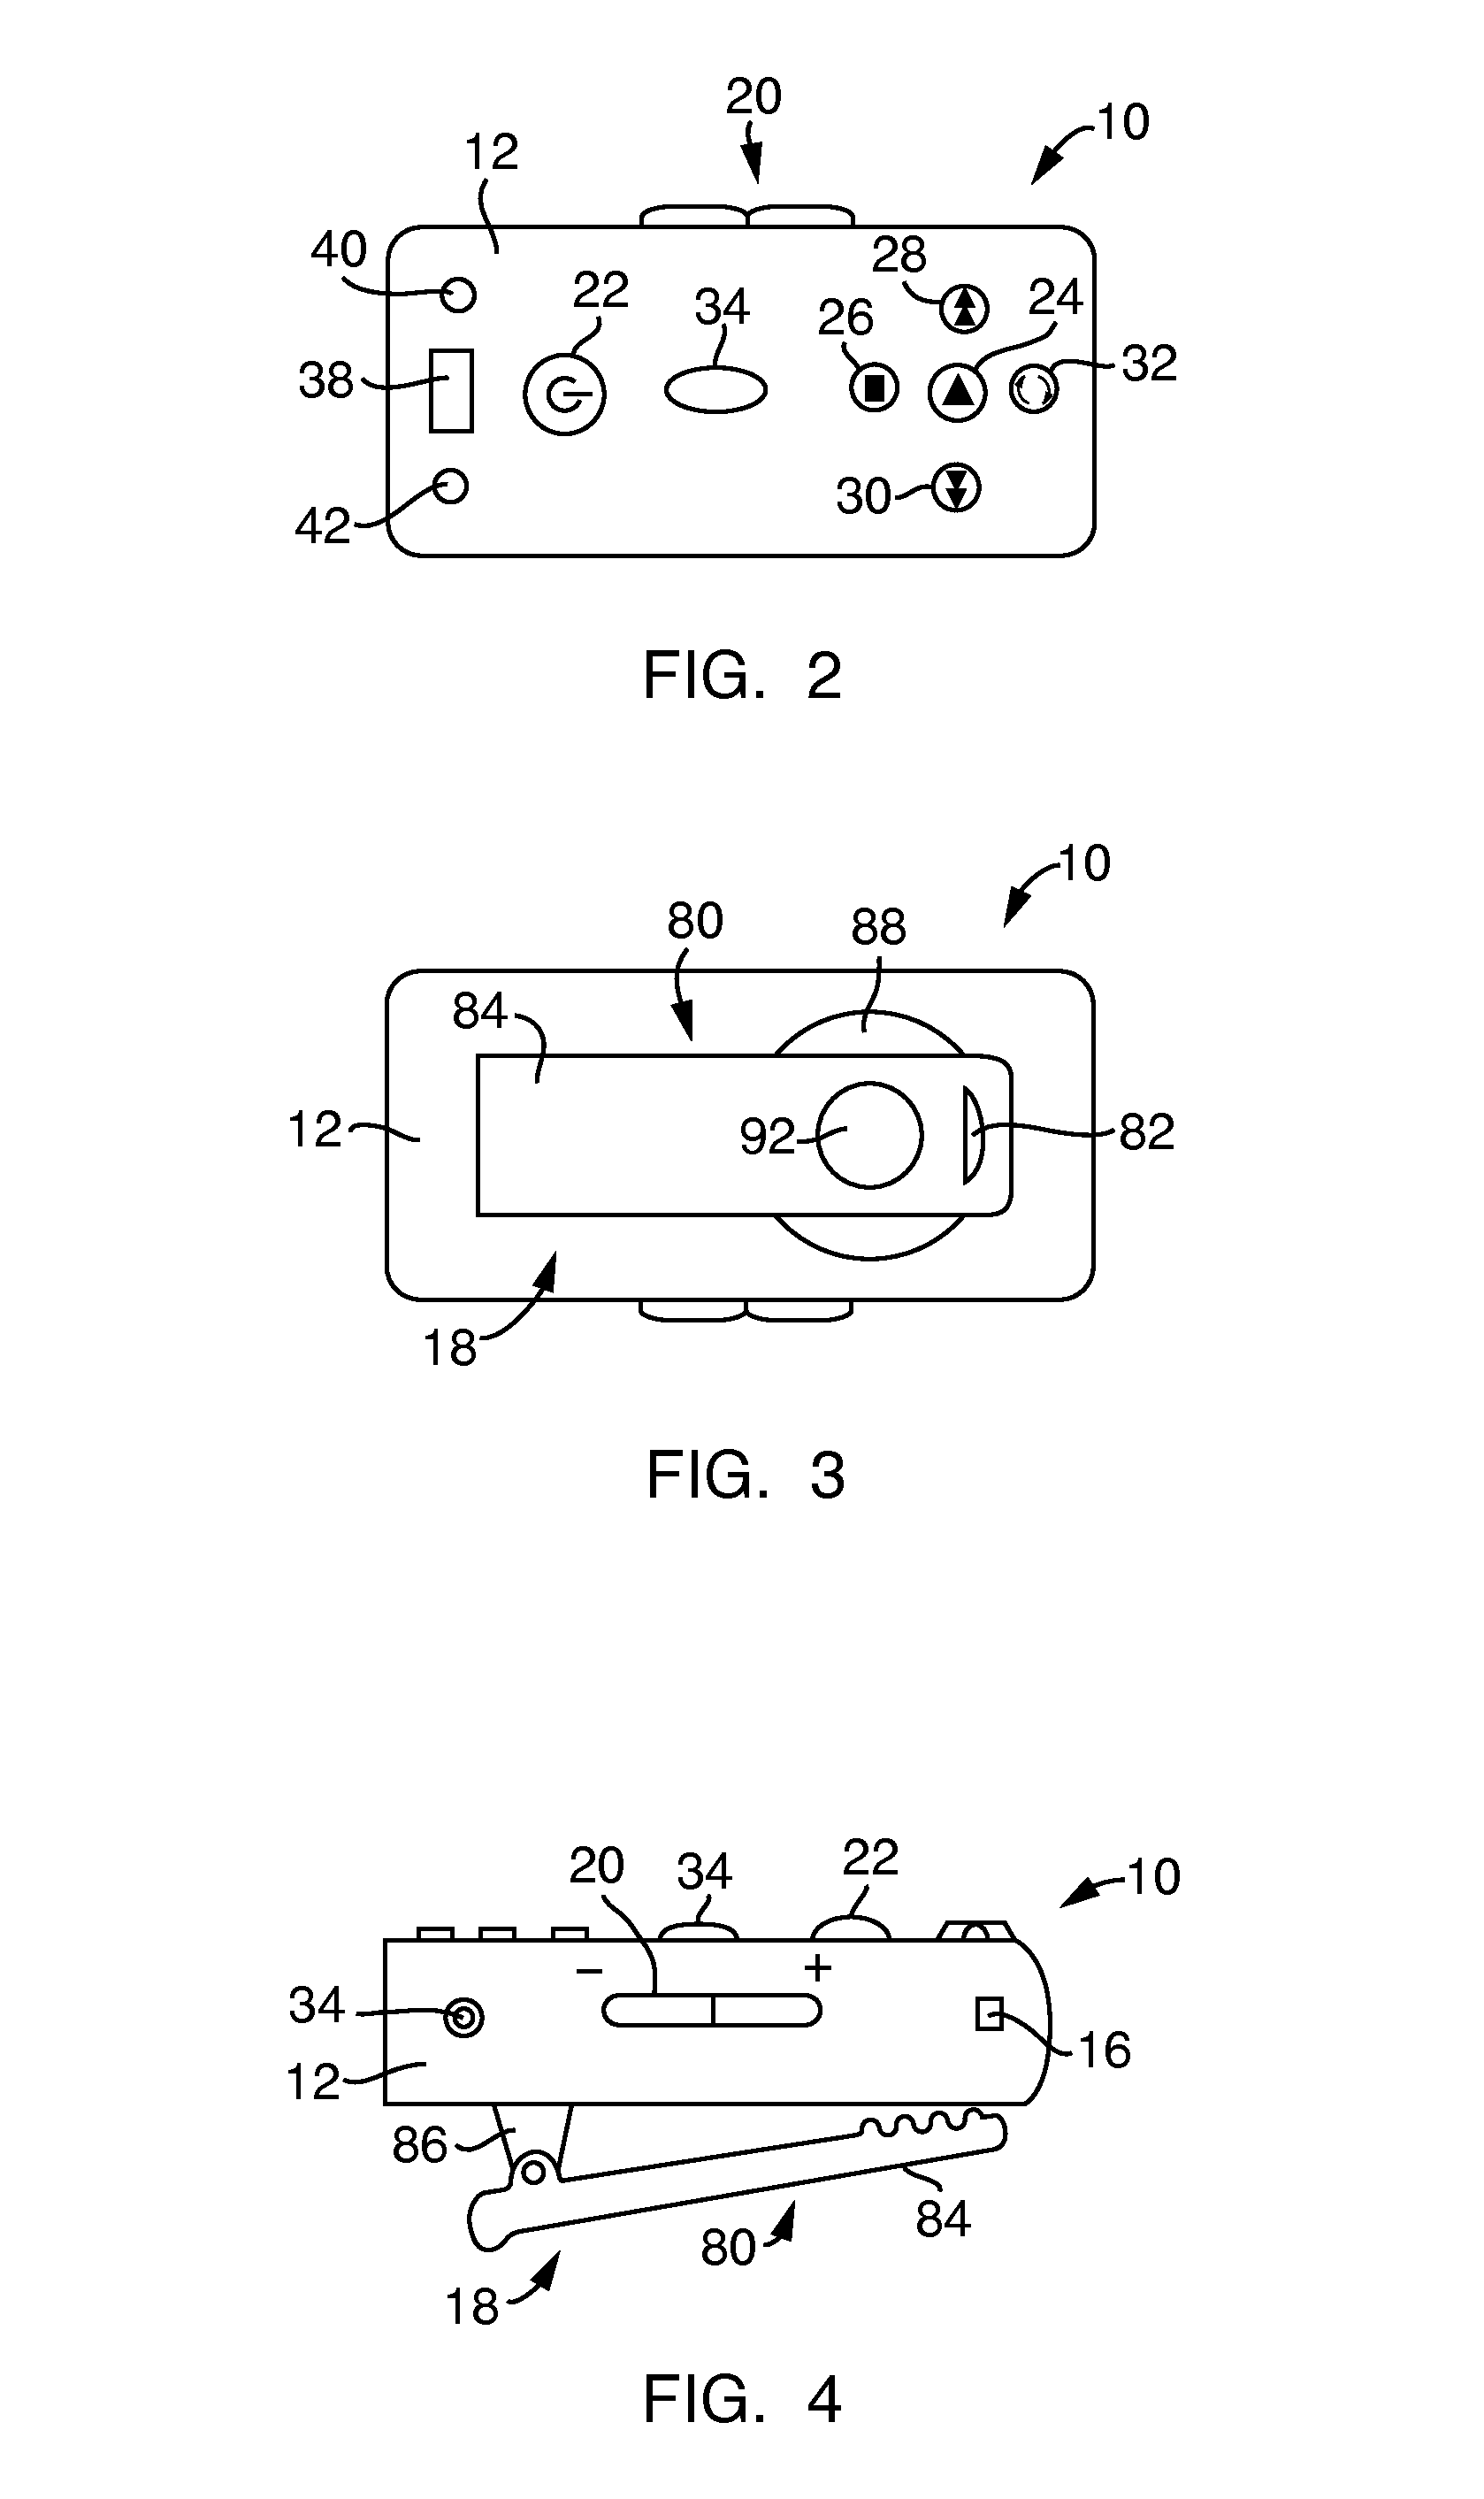 Hands-free mobile audio device for wirelessly connecting an electronic device with headphones for transmitting audio signals therethrough